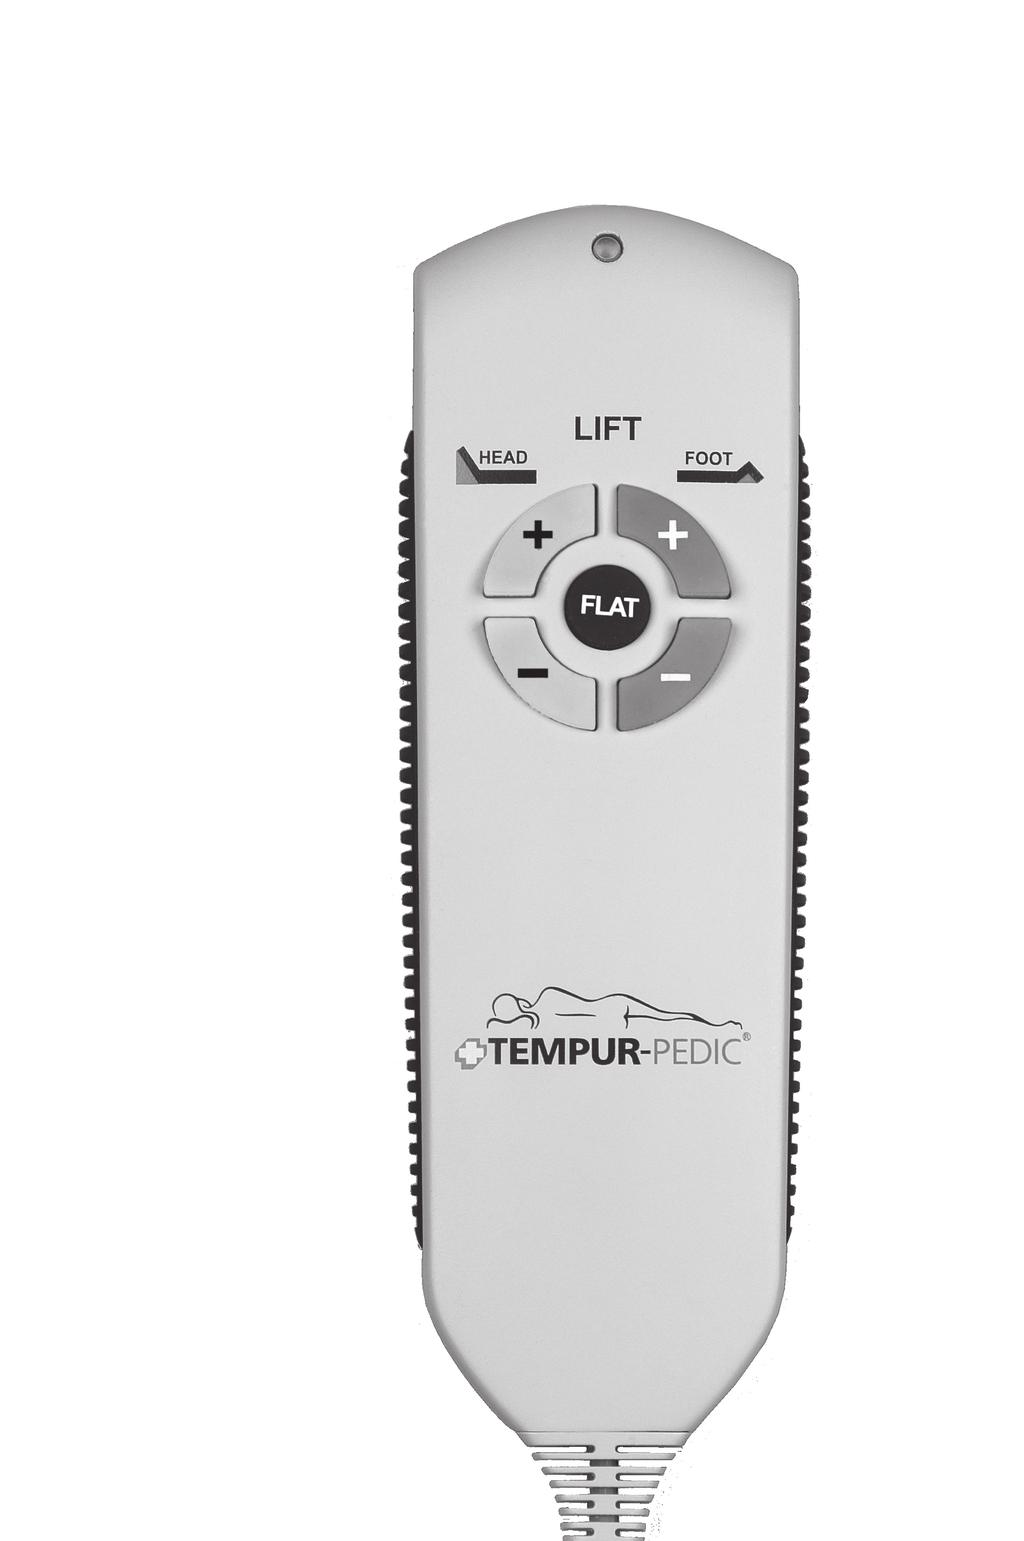 TMPUR RGO System Wired Remote Control Features RAD ADVISORY INFORMATION IN TH SAFTY PRCAUTIONS SCTION OF THIS GUID CARFULLY BFOR USING THIS PRODUCT.